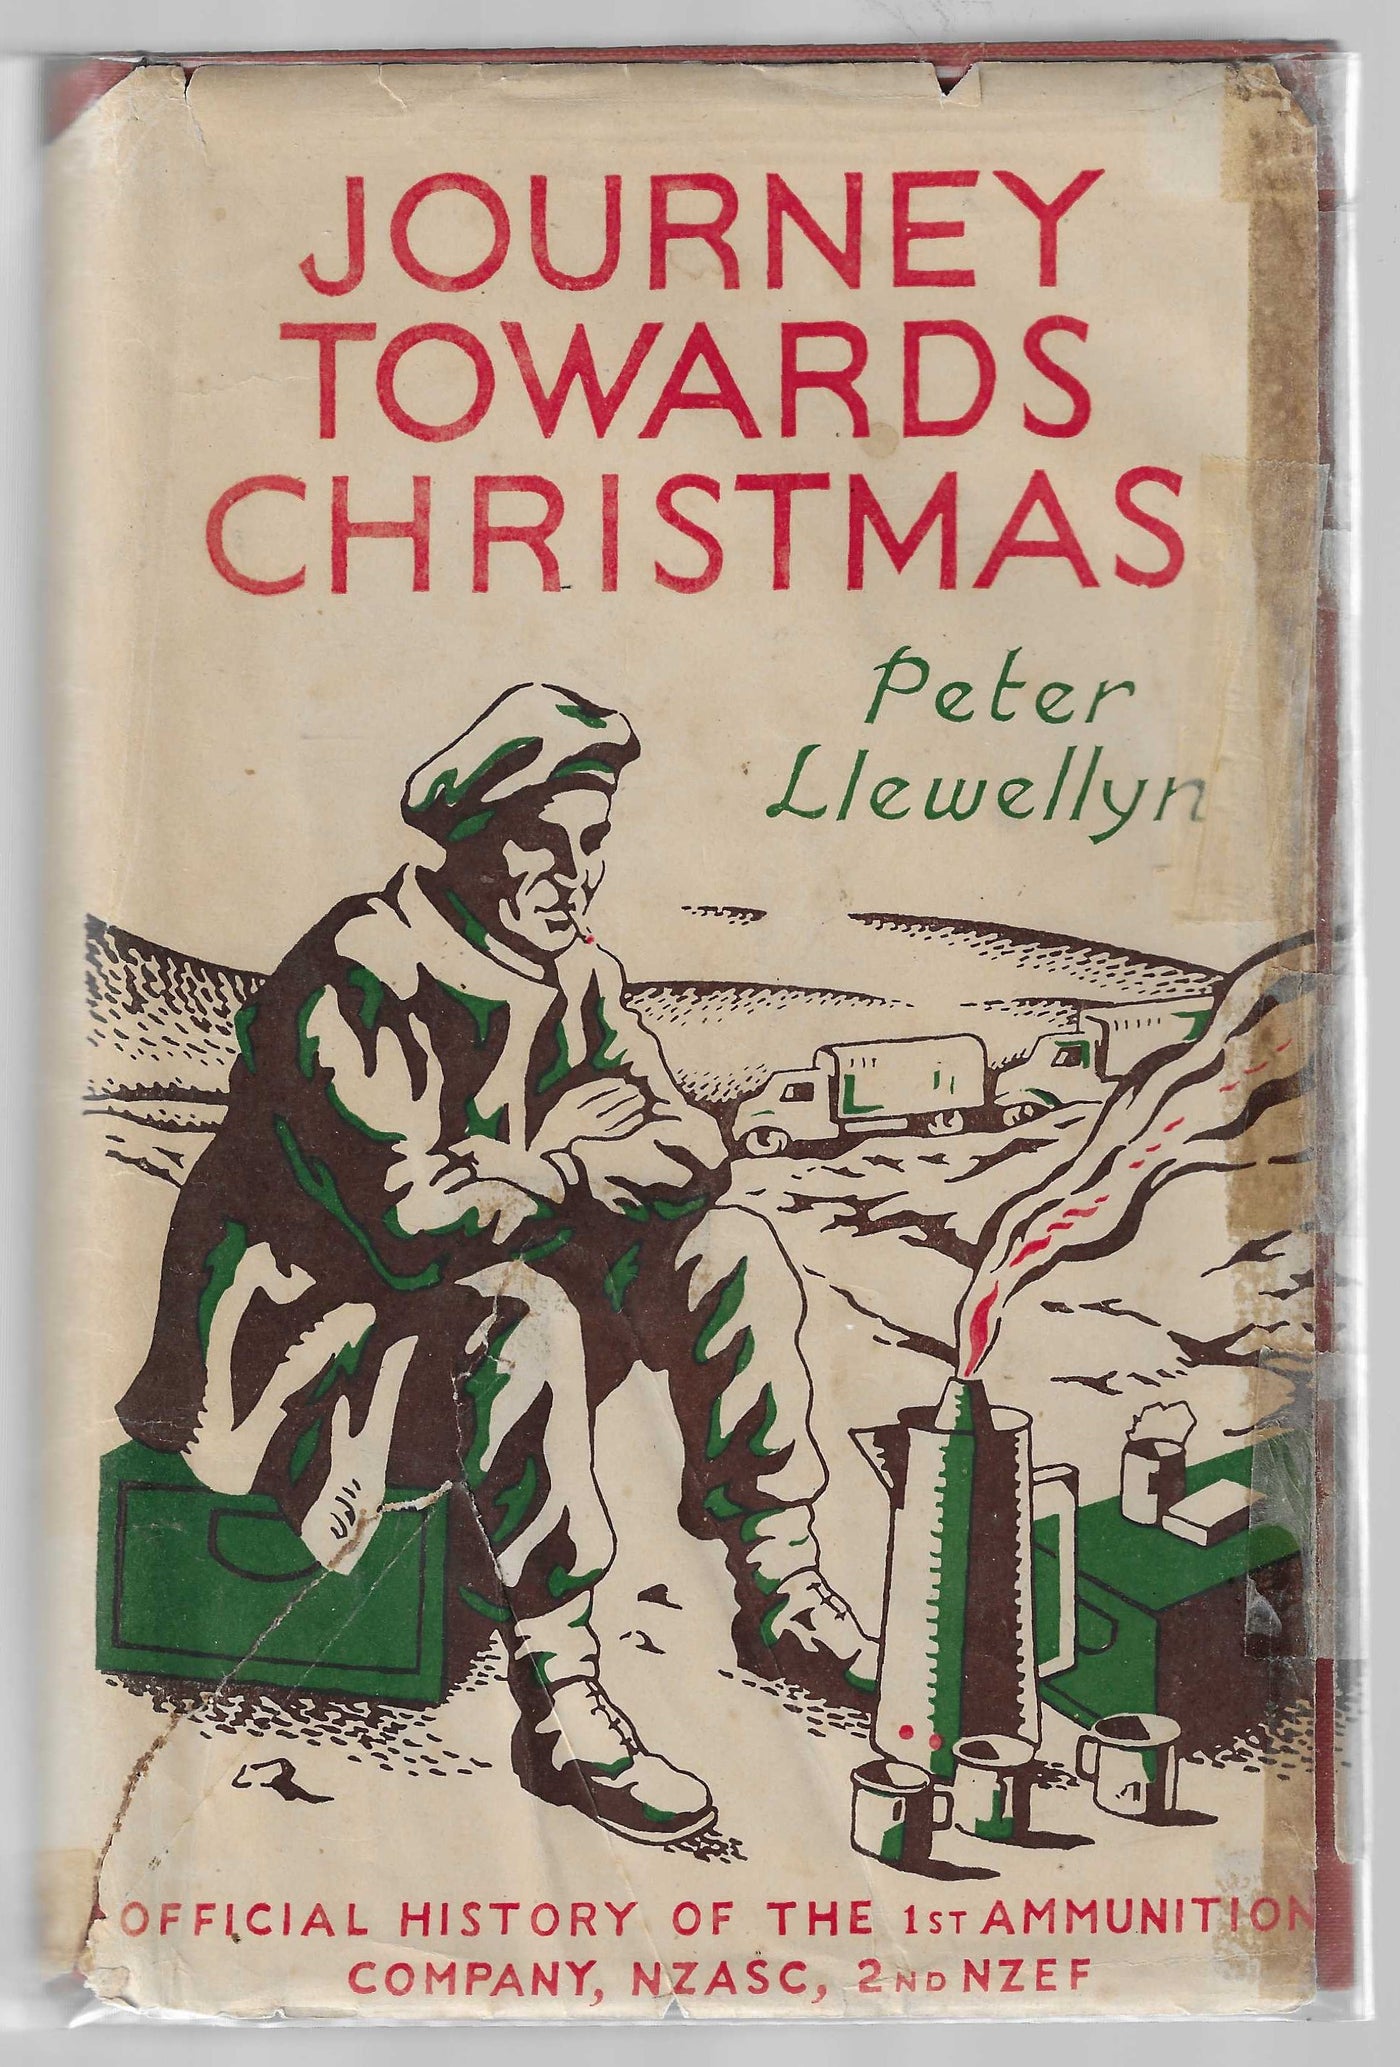 Journey Towards Christmas: Official History of the 1st Ammunition Company, NZASC, 2nd NZEF